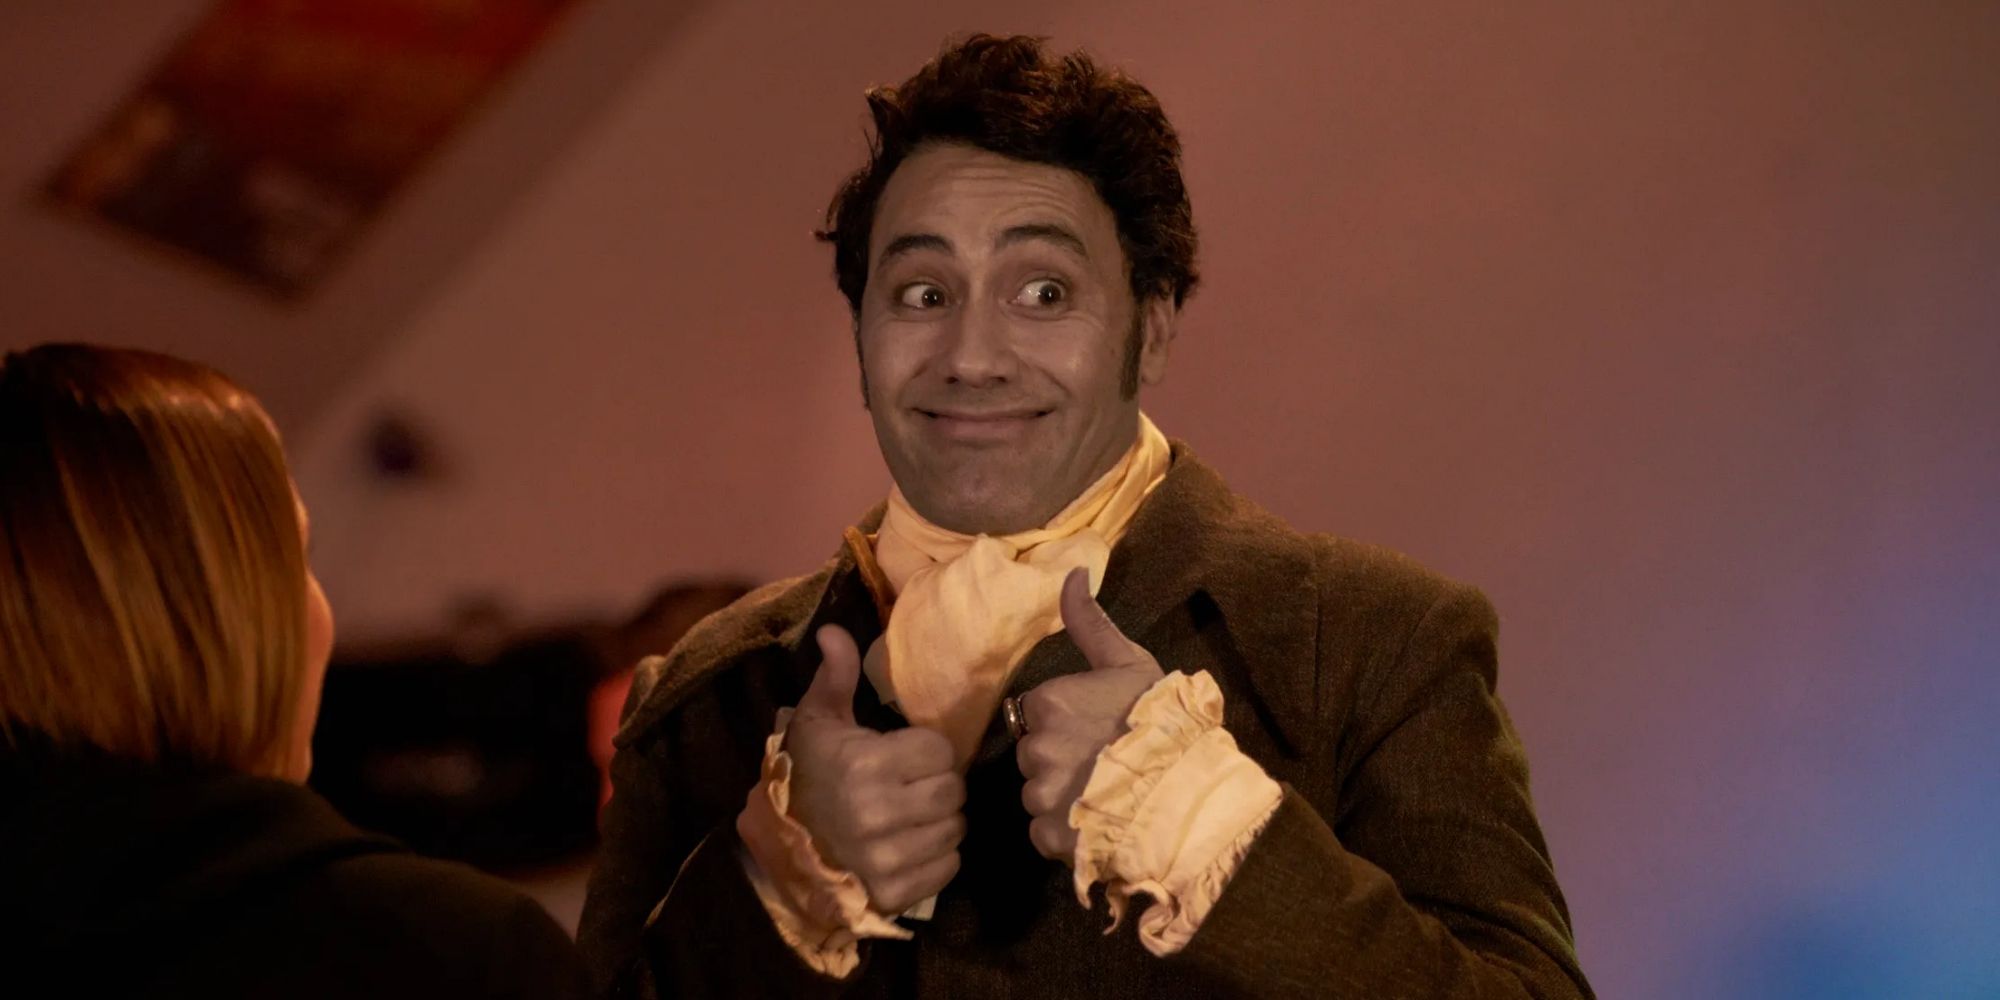 Viago smiling and giving a thumbs-up in 'What We Do in the Shadows'